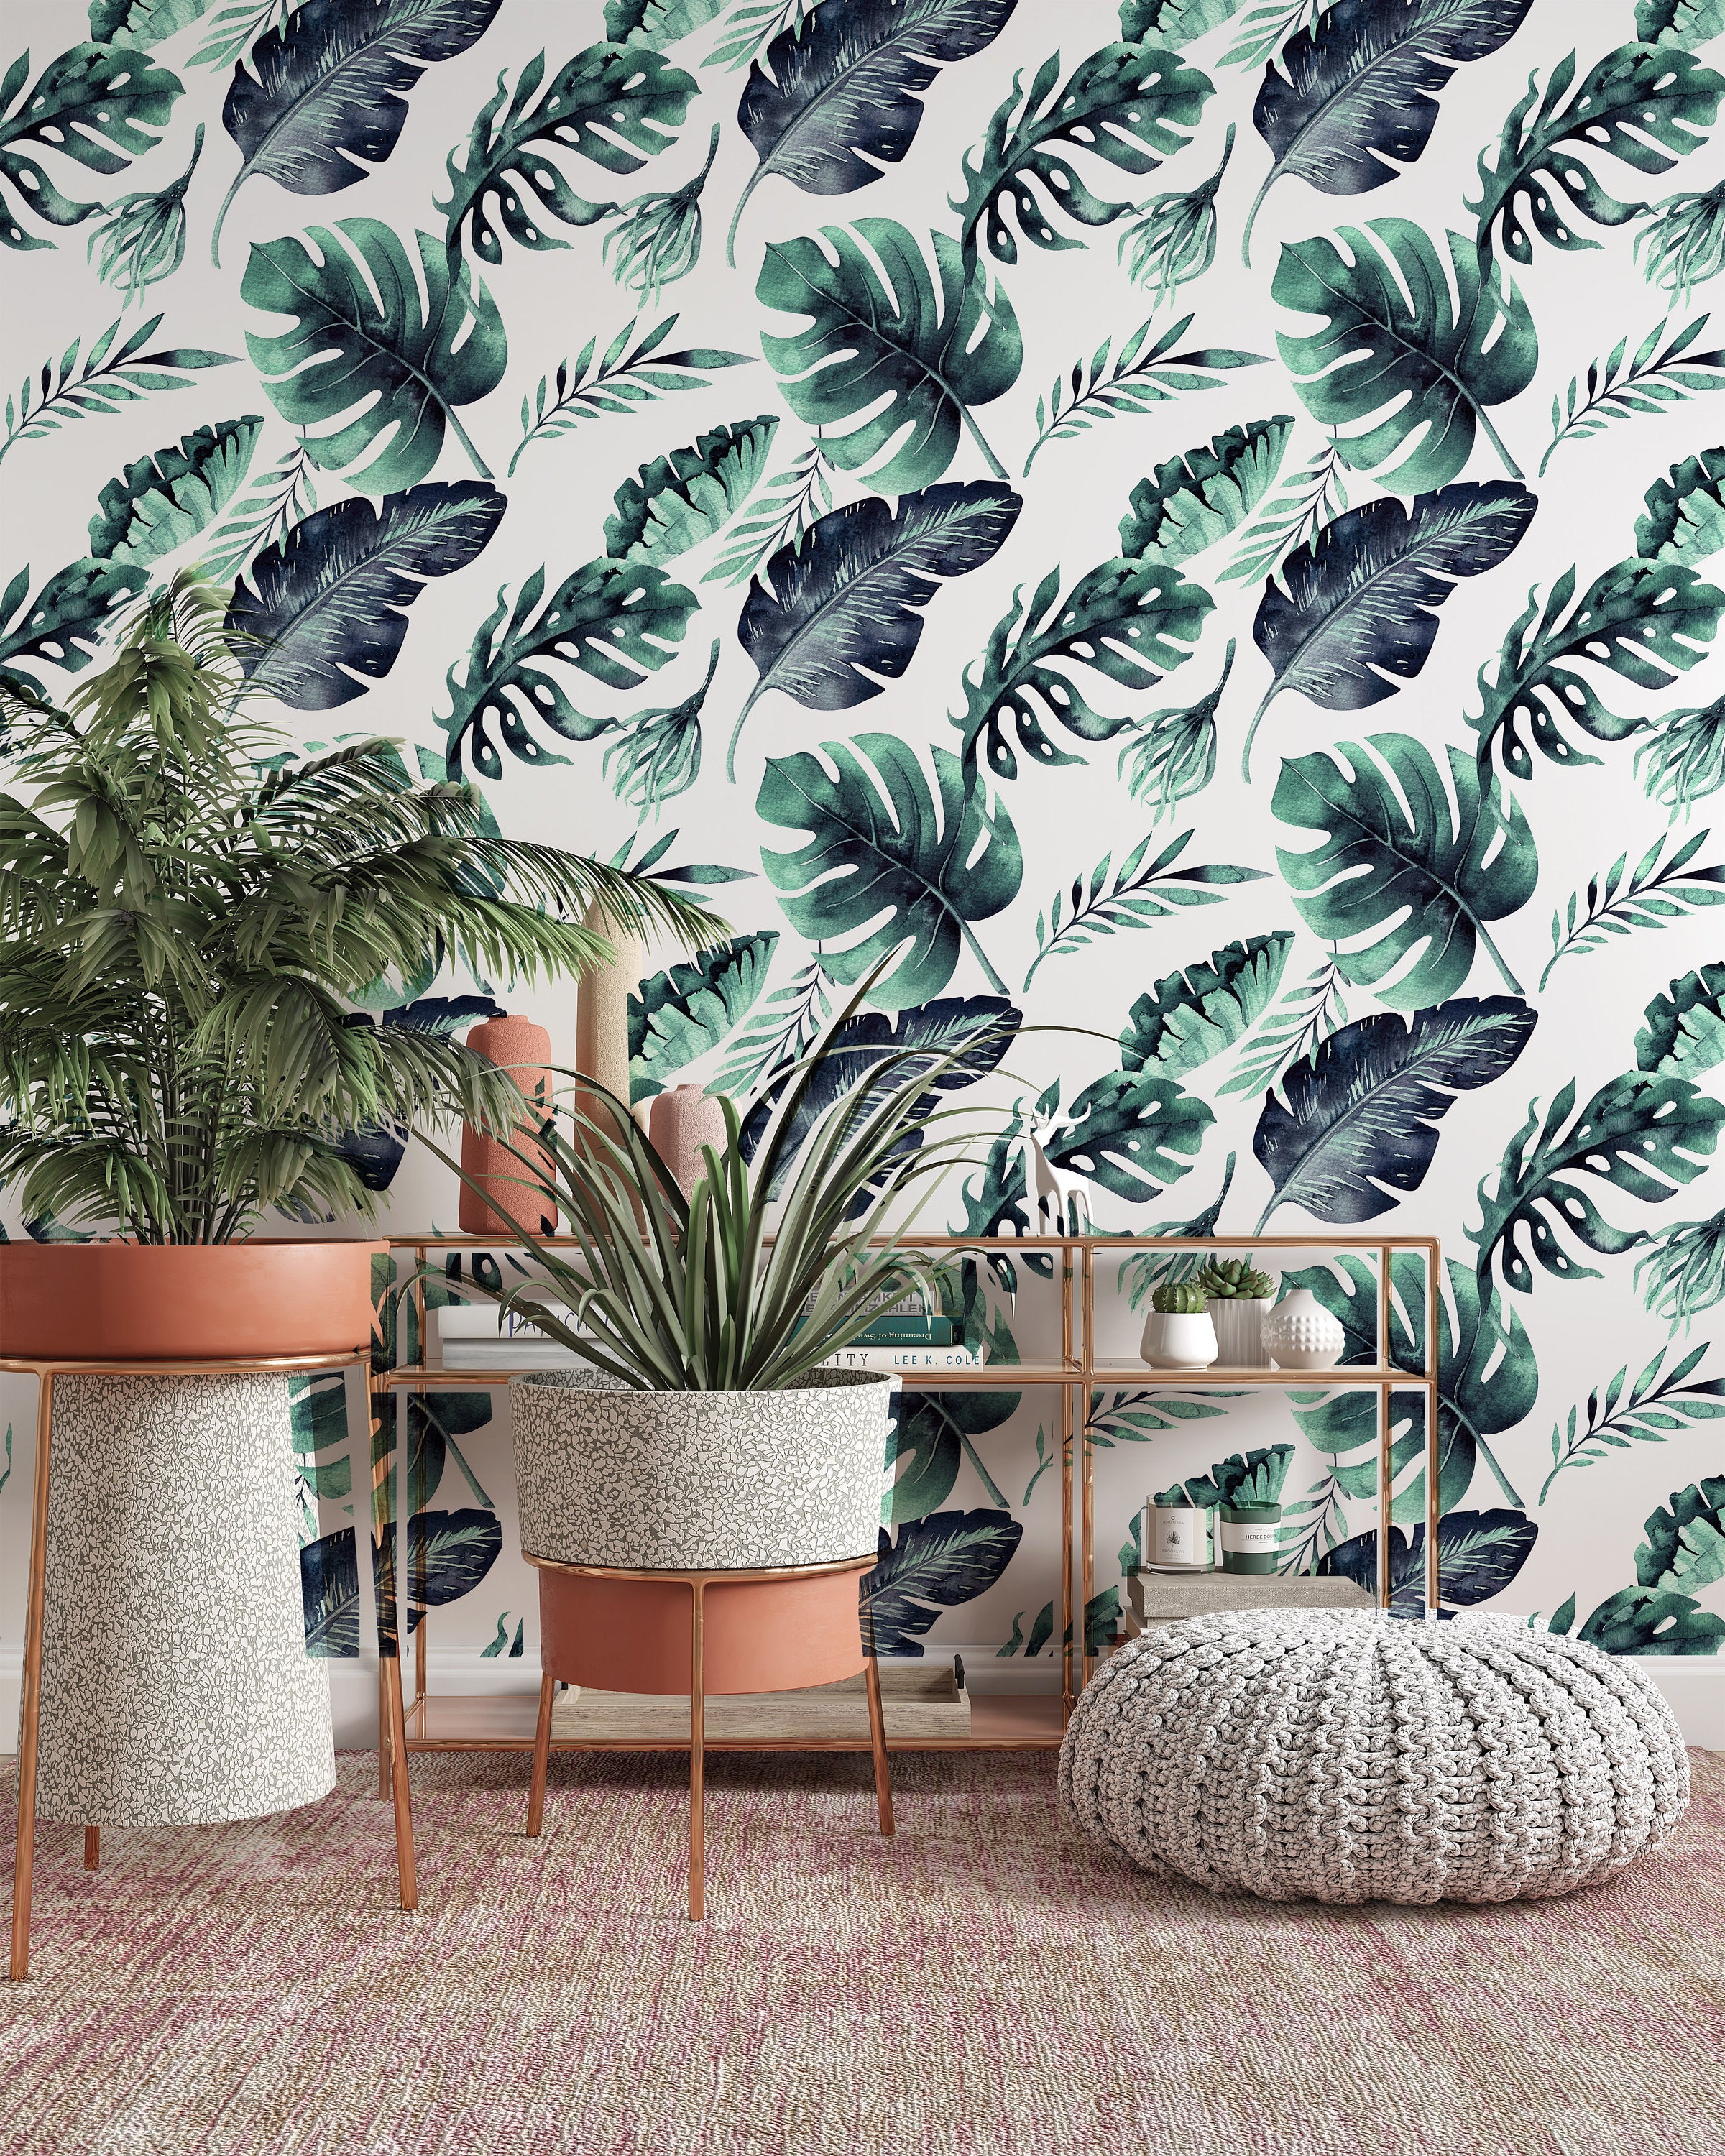 Watercolor Tropical Exotic Leaves Flowers Floral Modern Background Wallpaper Restaurant Living Room Cafe Office Bedroom Mural Home Wall Art